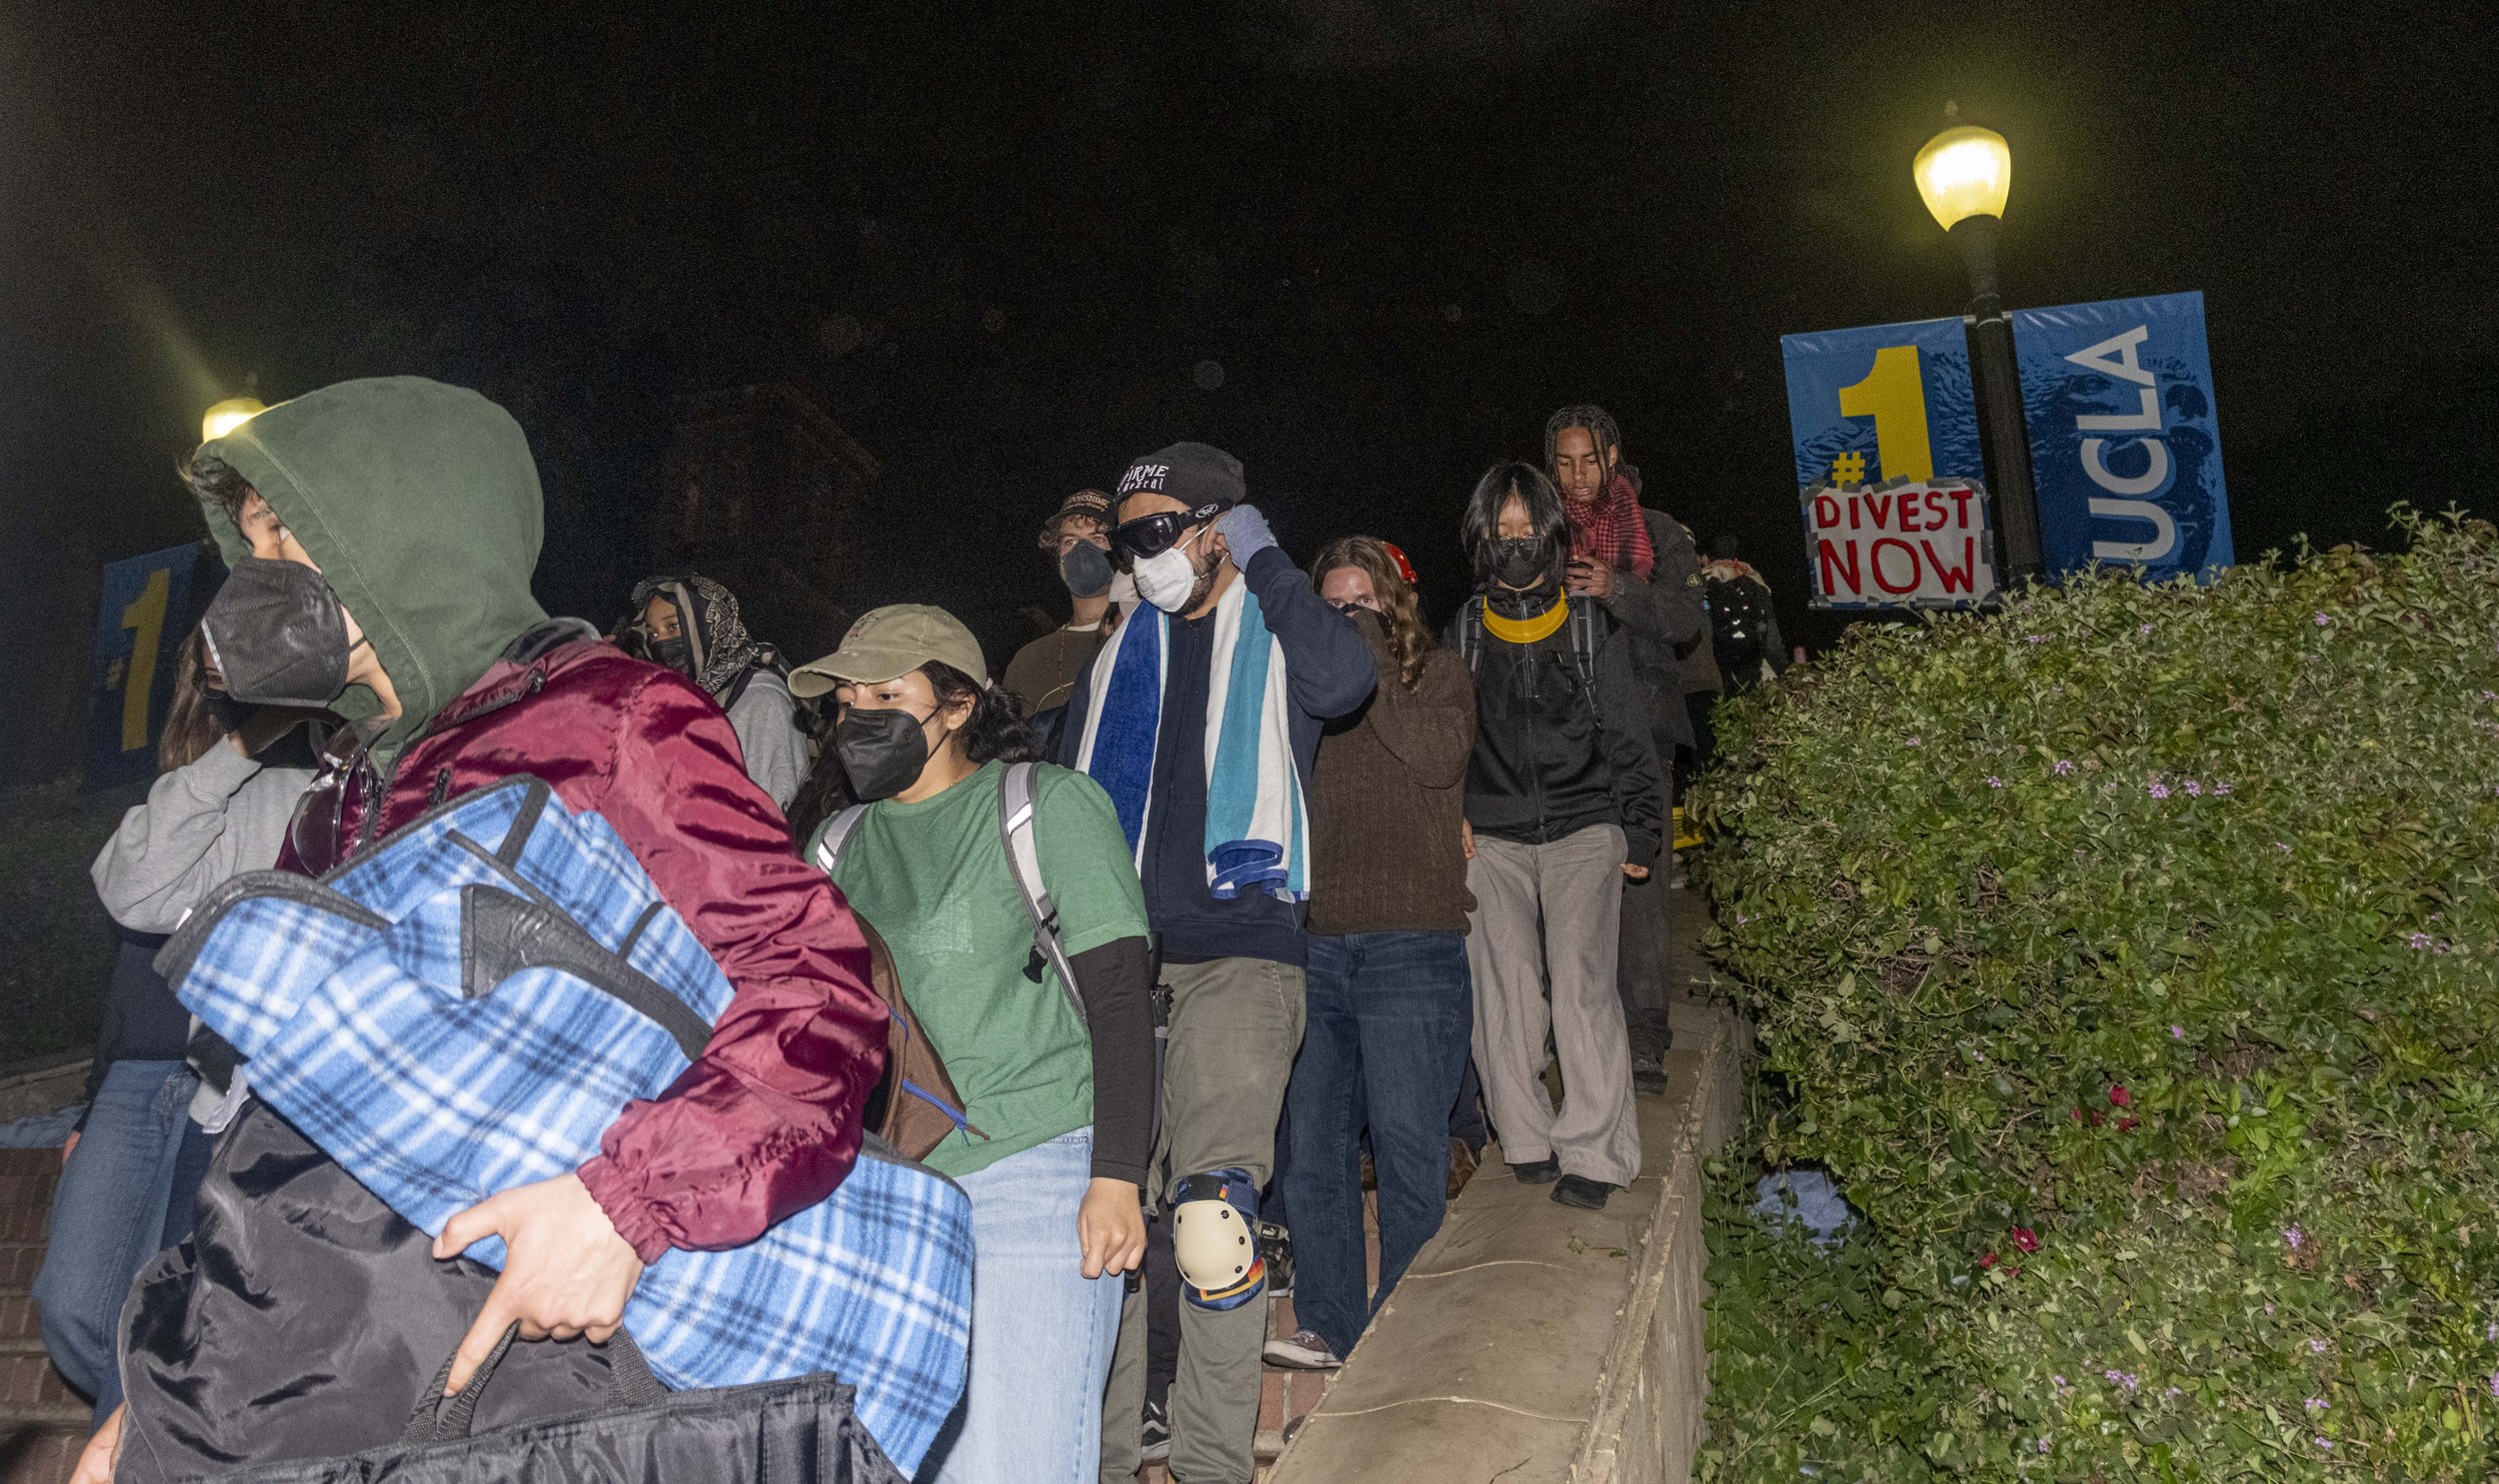  Pro-Palastinian supporters retreat down the stairs heading towards Wilson Plaza after California Highway Patrol Special Operations Unit successfully clears half the encampment at Dickson Court in the University of California, Los Angeles on Wednesda